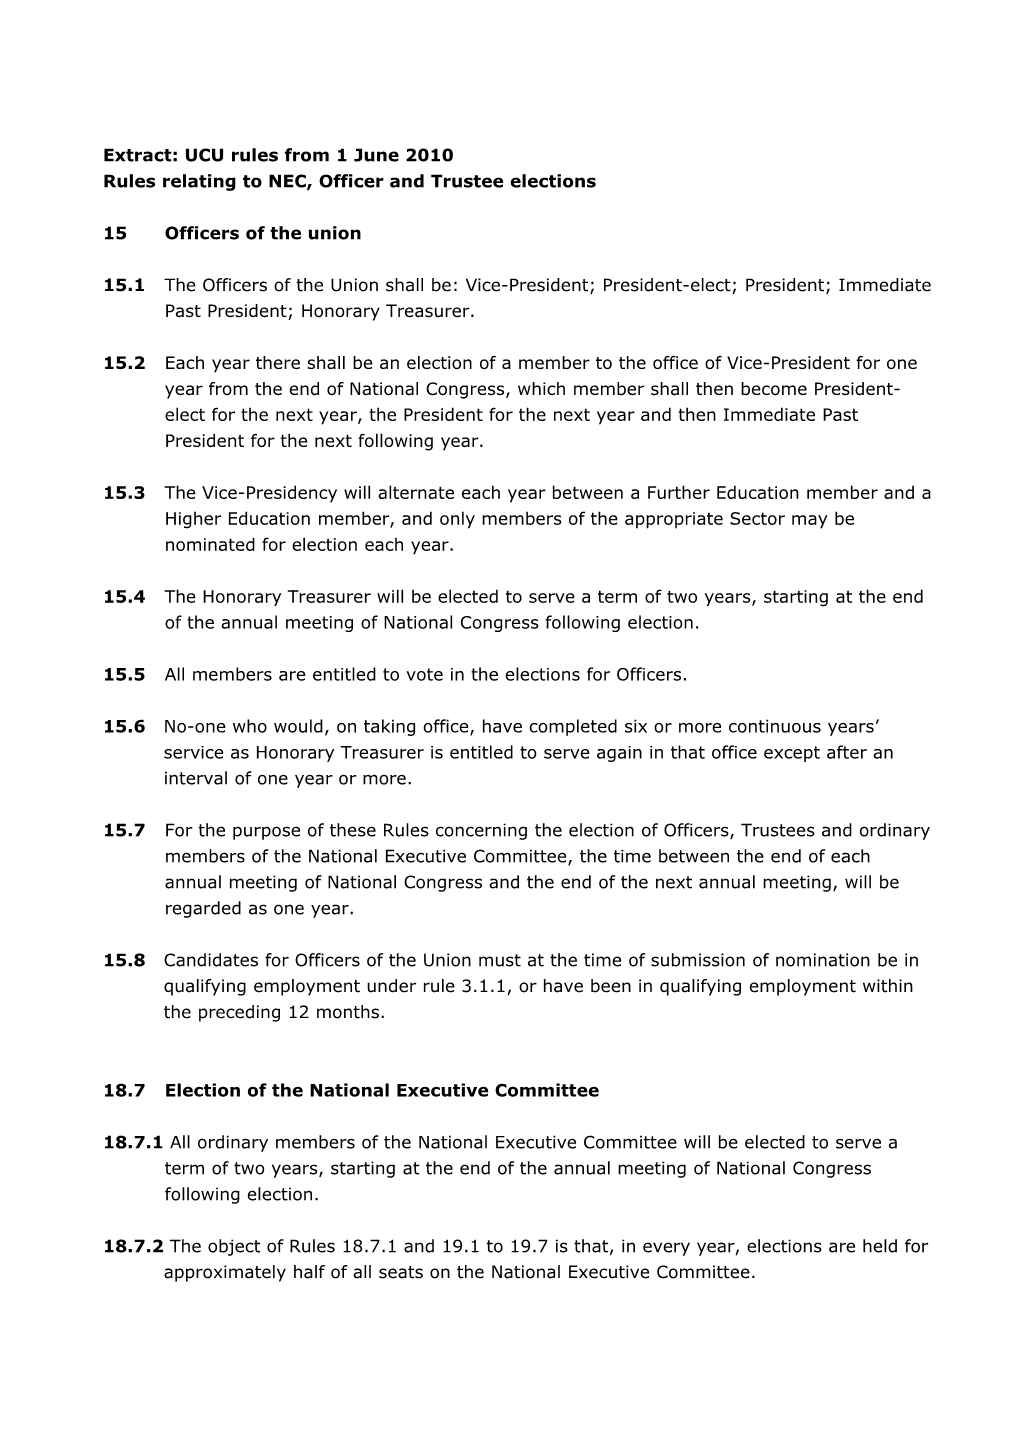 Rules Relating to NEC, Officer and Trustee Elections